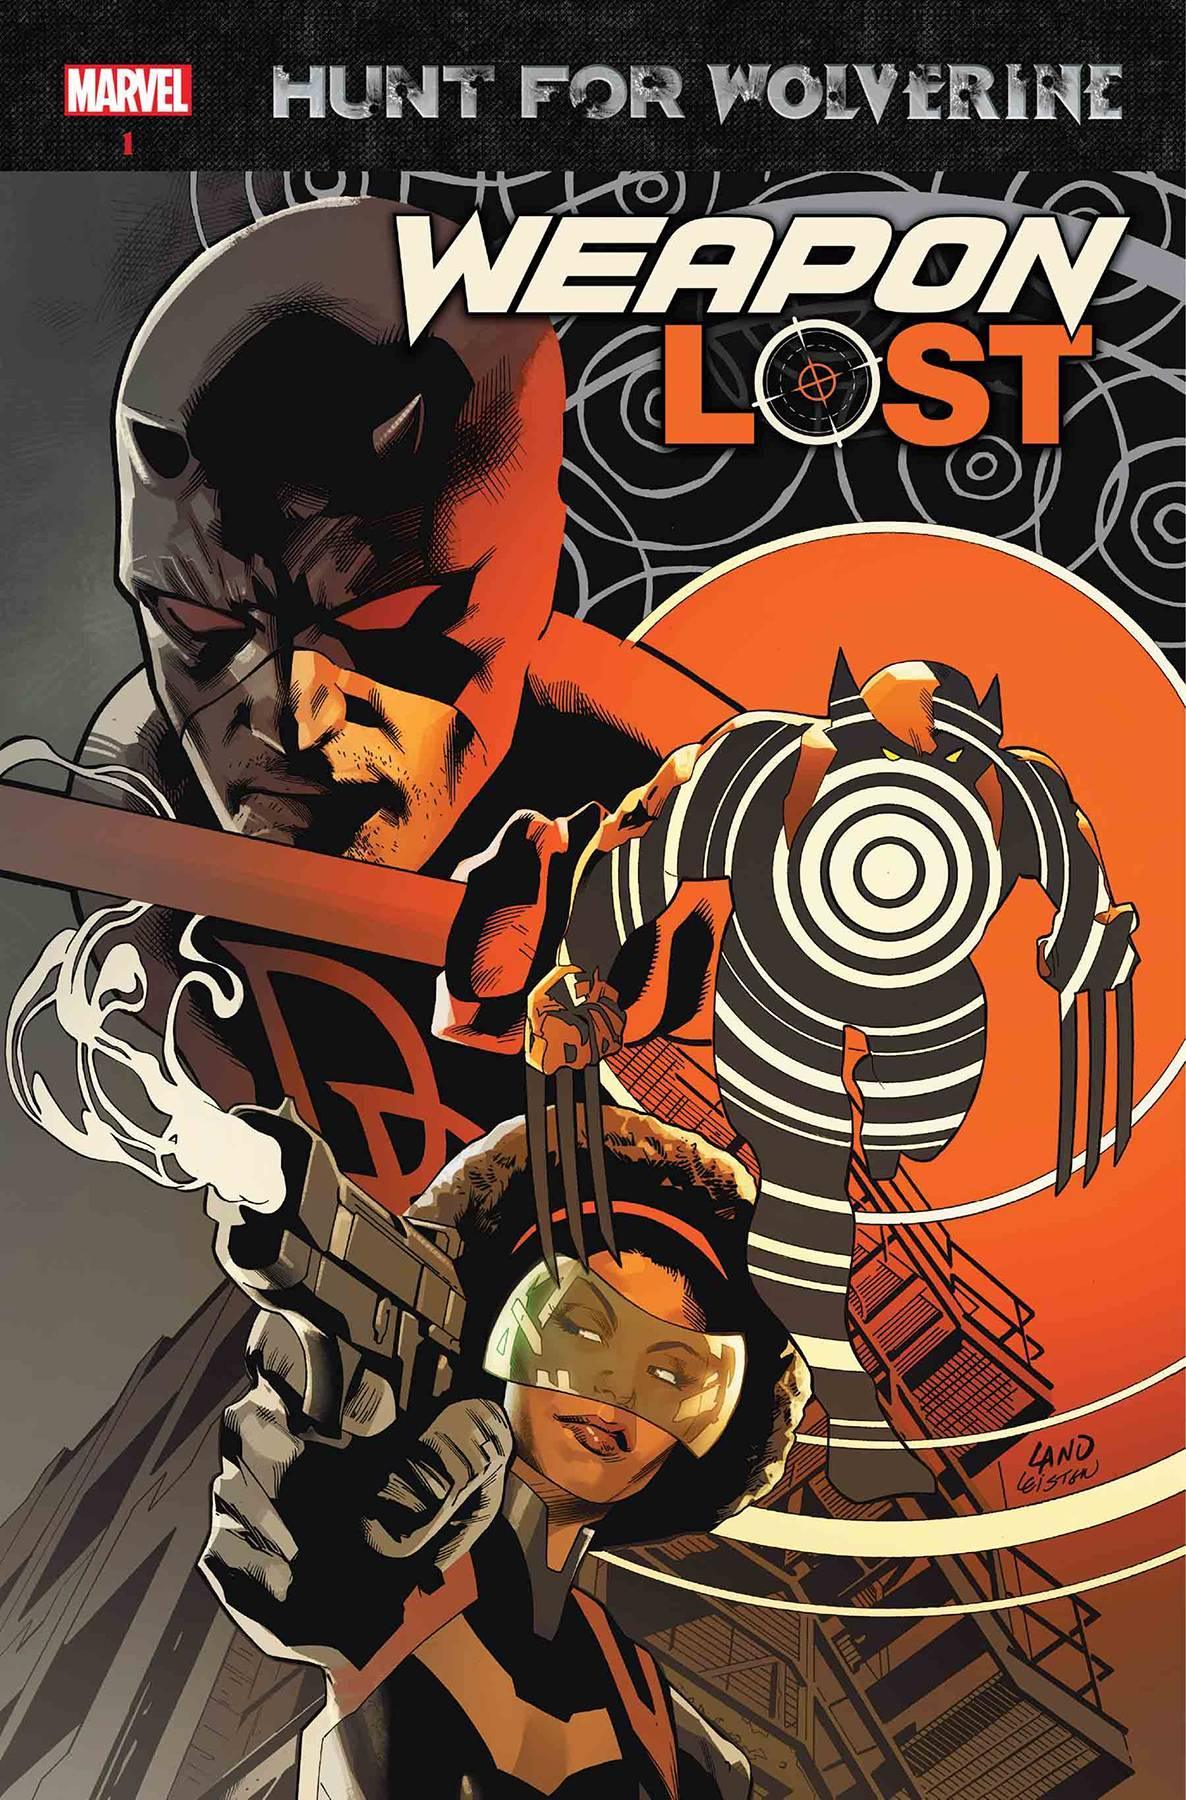 HUNT FOR WOLVERINE WEAPON LOST #1 - Kings Comics